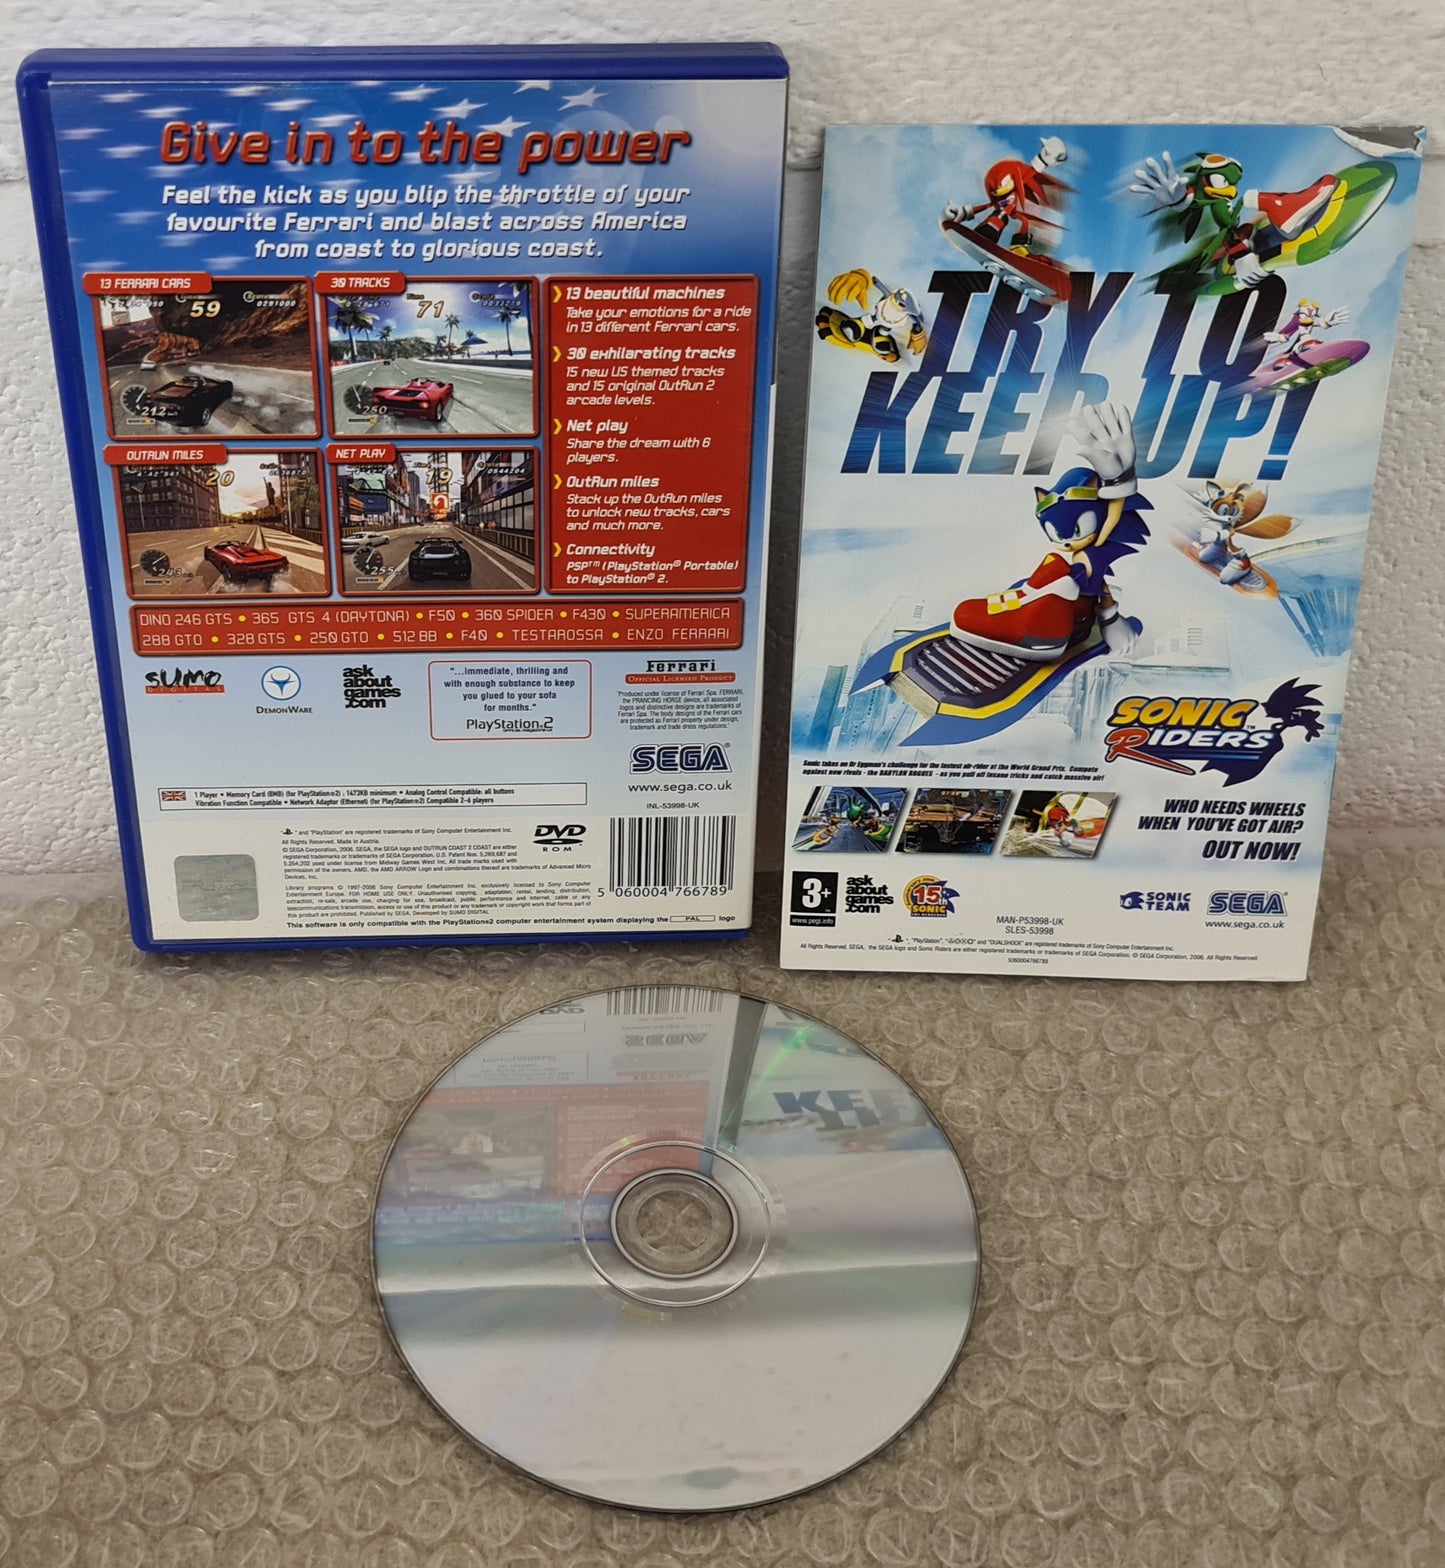 Outrun 2006 Coast 2 Coast Sony Playstation 2 (PS2) Game